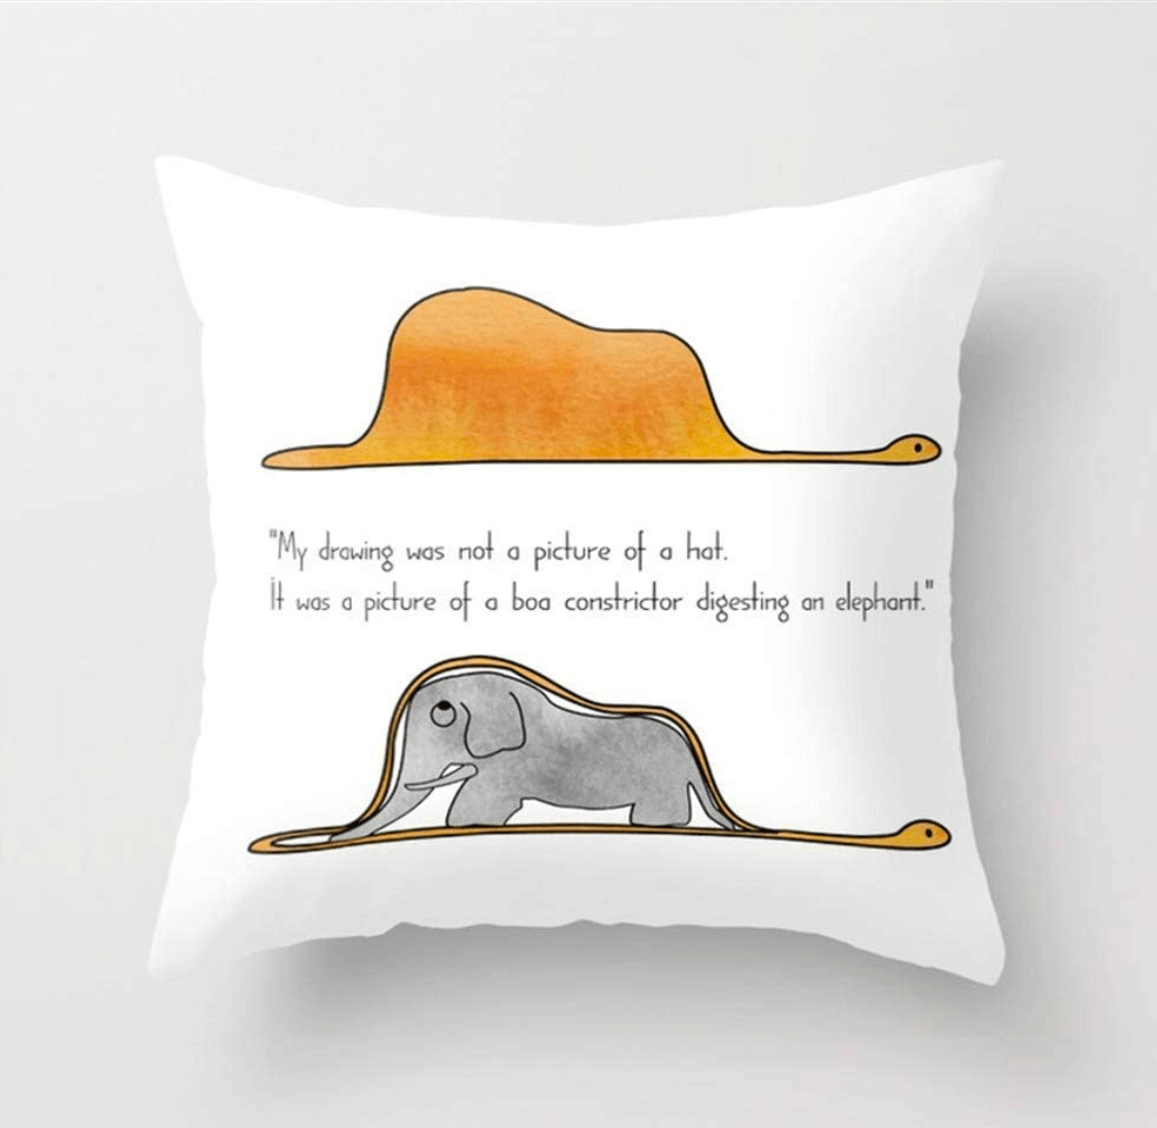 A throw pillow with a drawing from "The Little Prince" that reads "My drawing was not a picture of a hat. It was picture of a boa constrictor digesting an elephant."